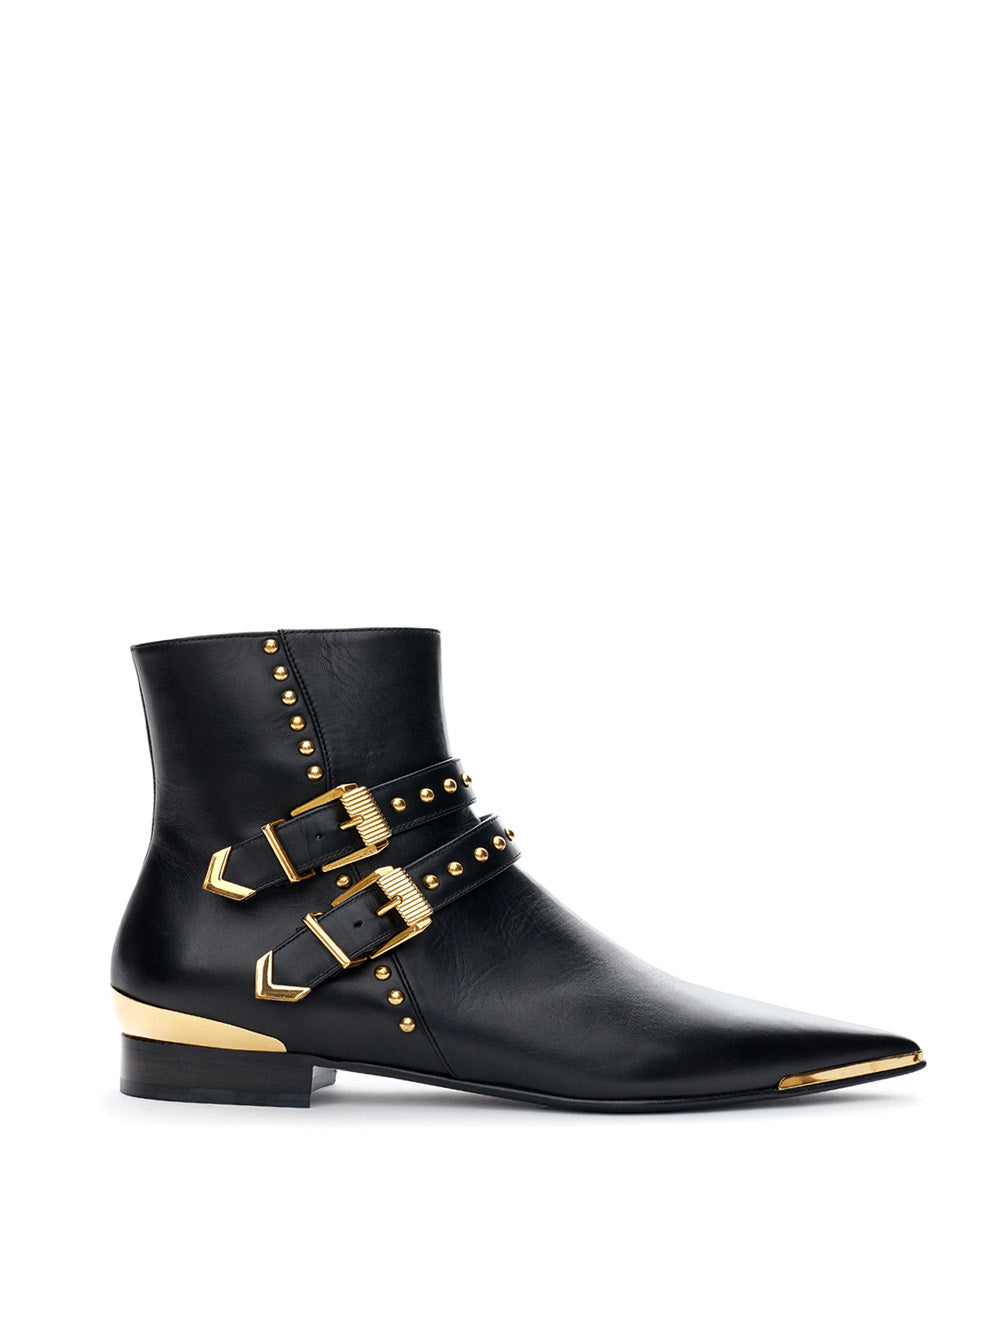 Black ankle boot with Versace Gold Studs